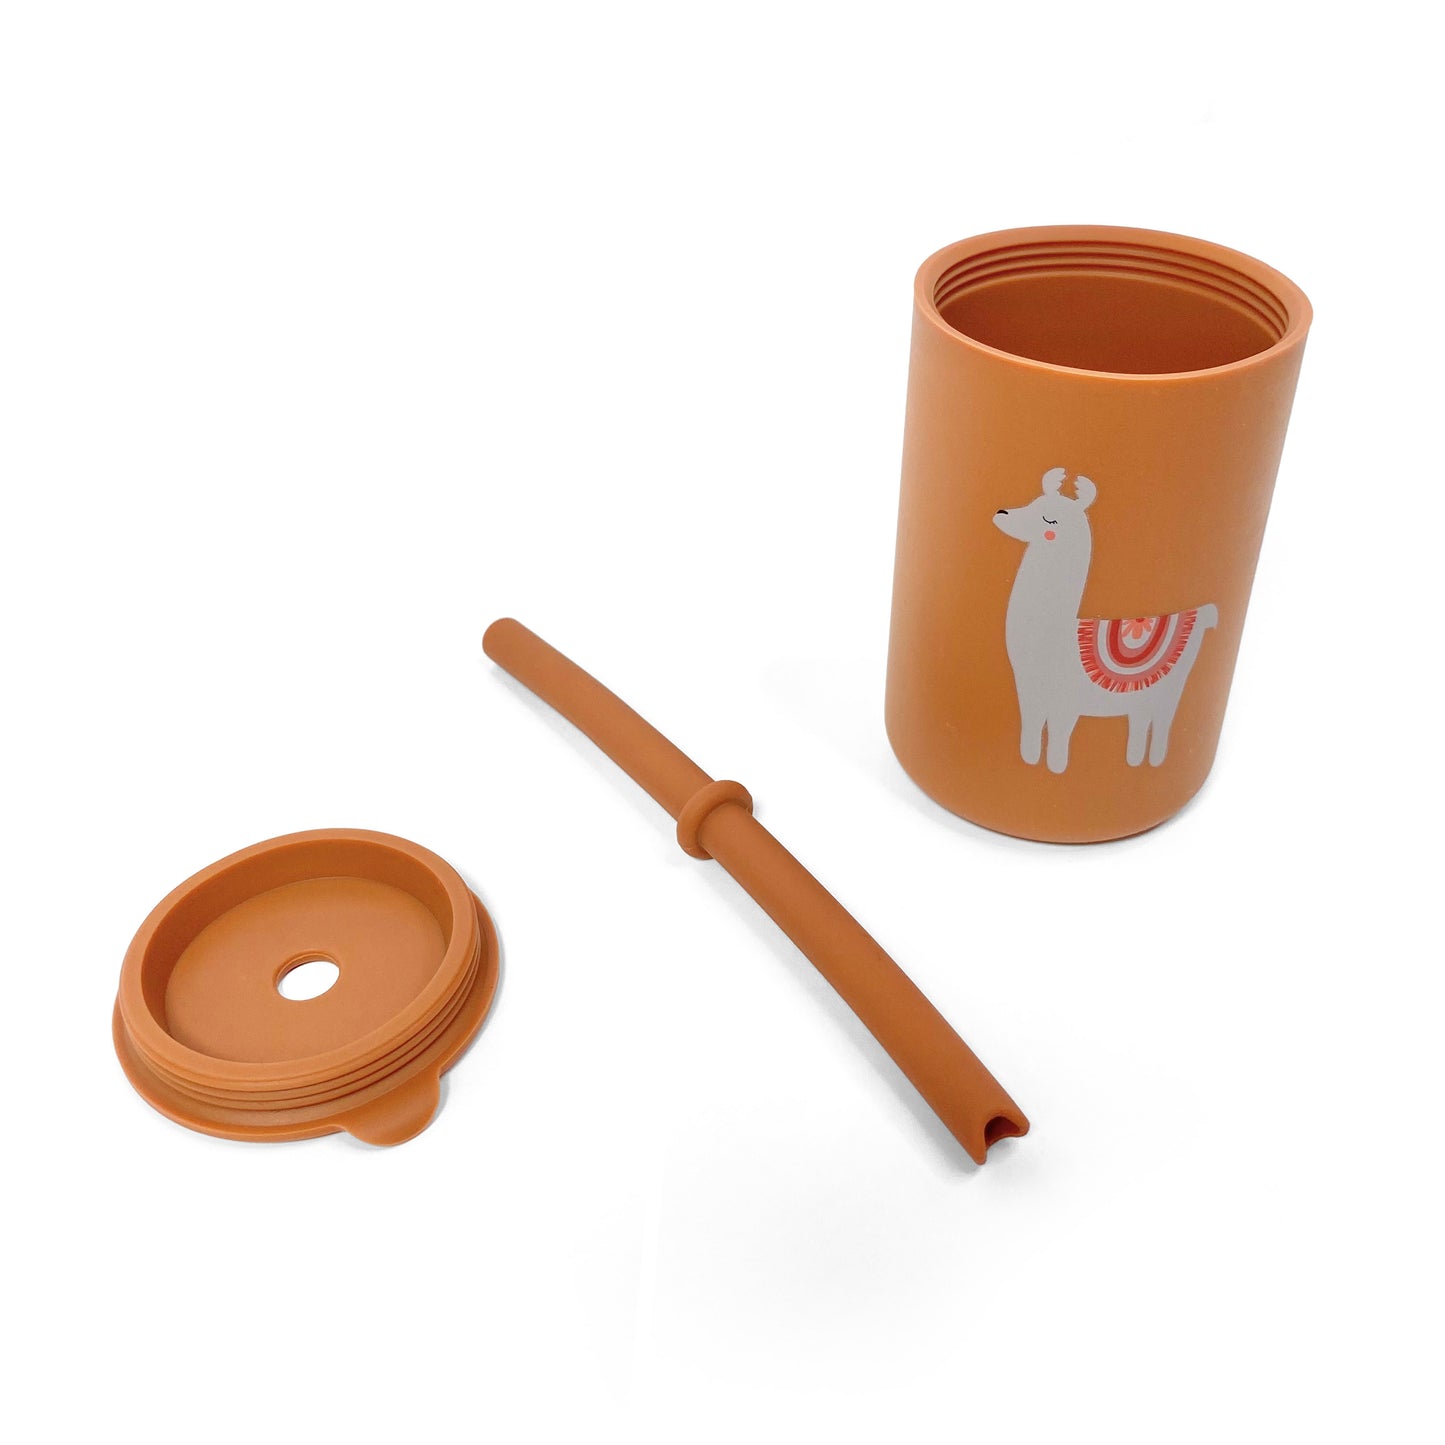 A children’s orange silicone drinking cup, with matching lid and straw, featuring a llama design. The image shows the cup, lid and straw separately.